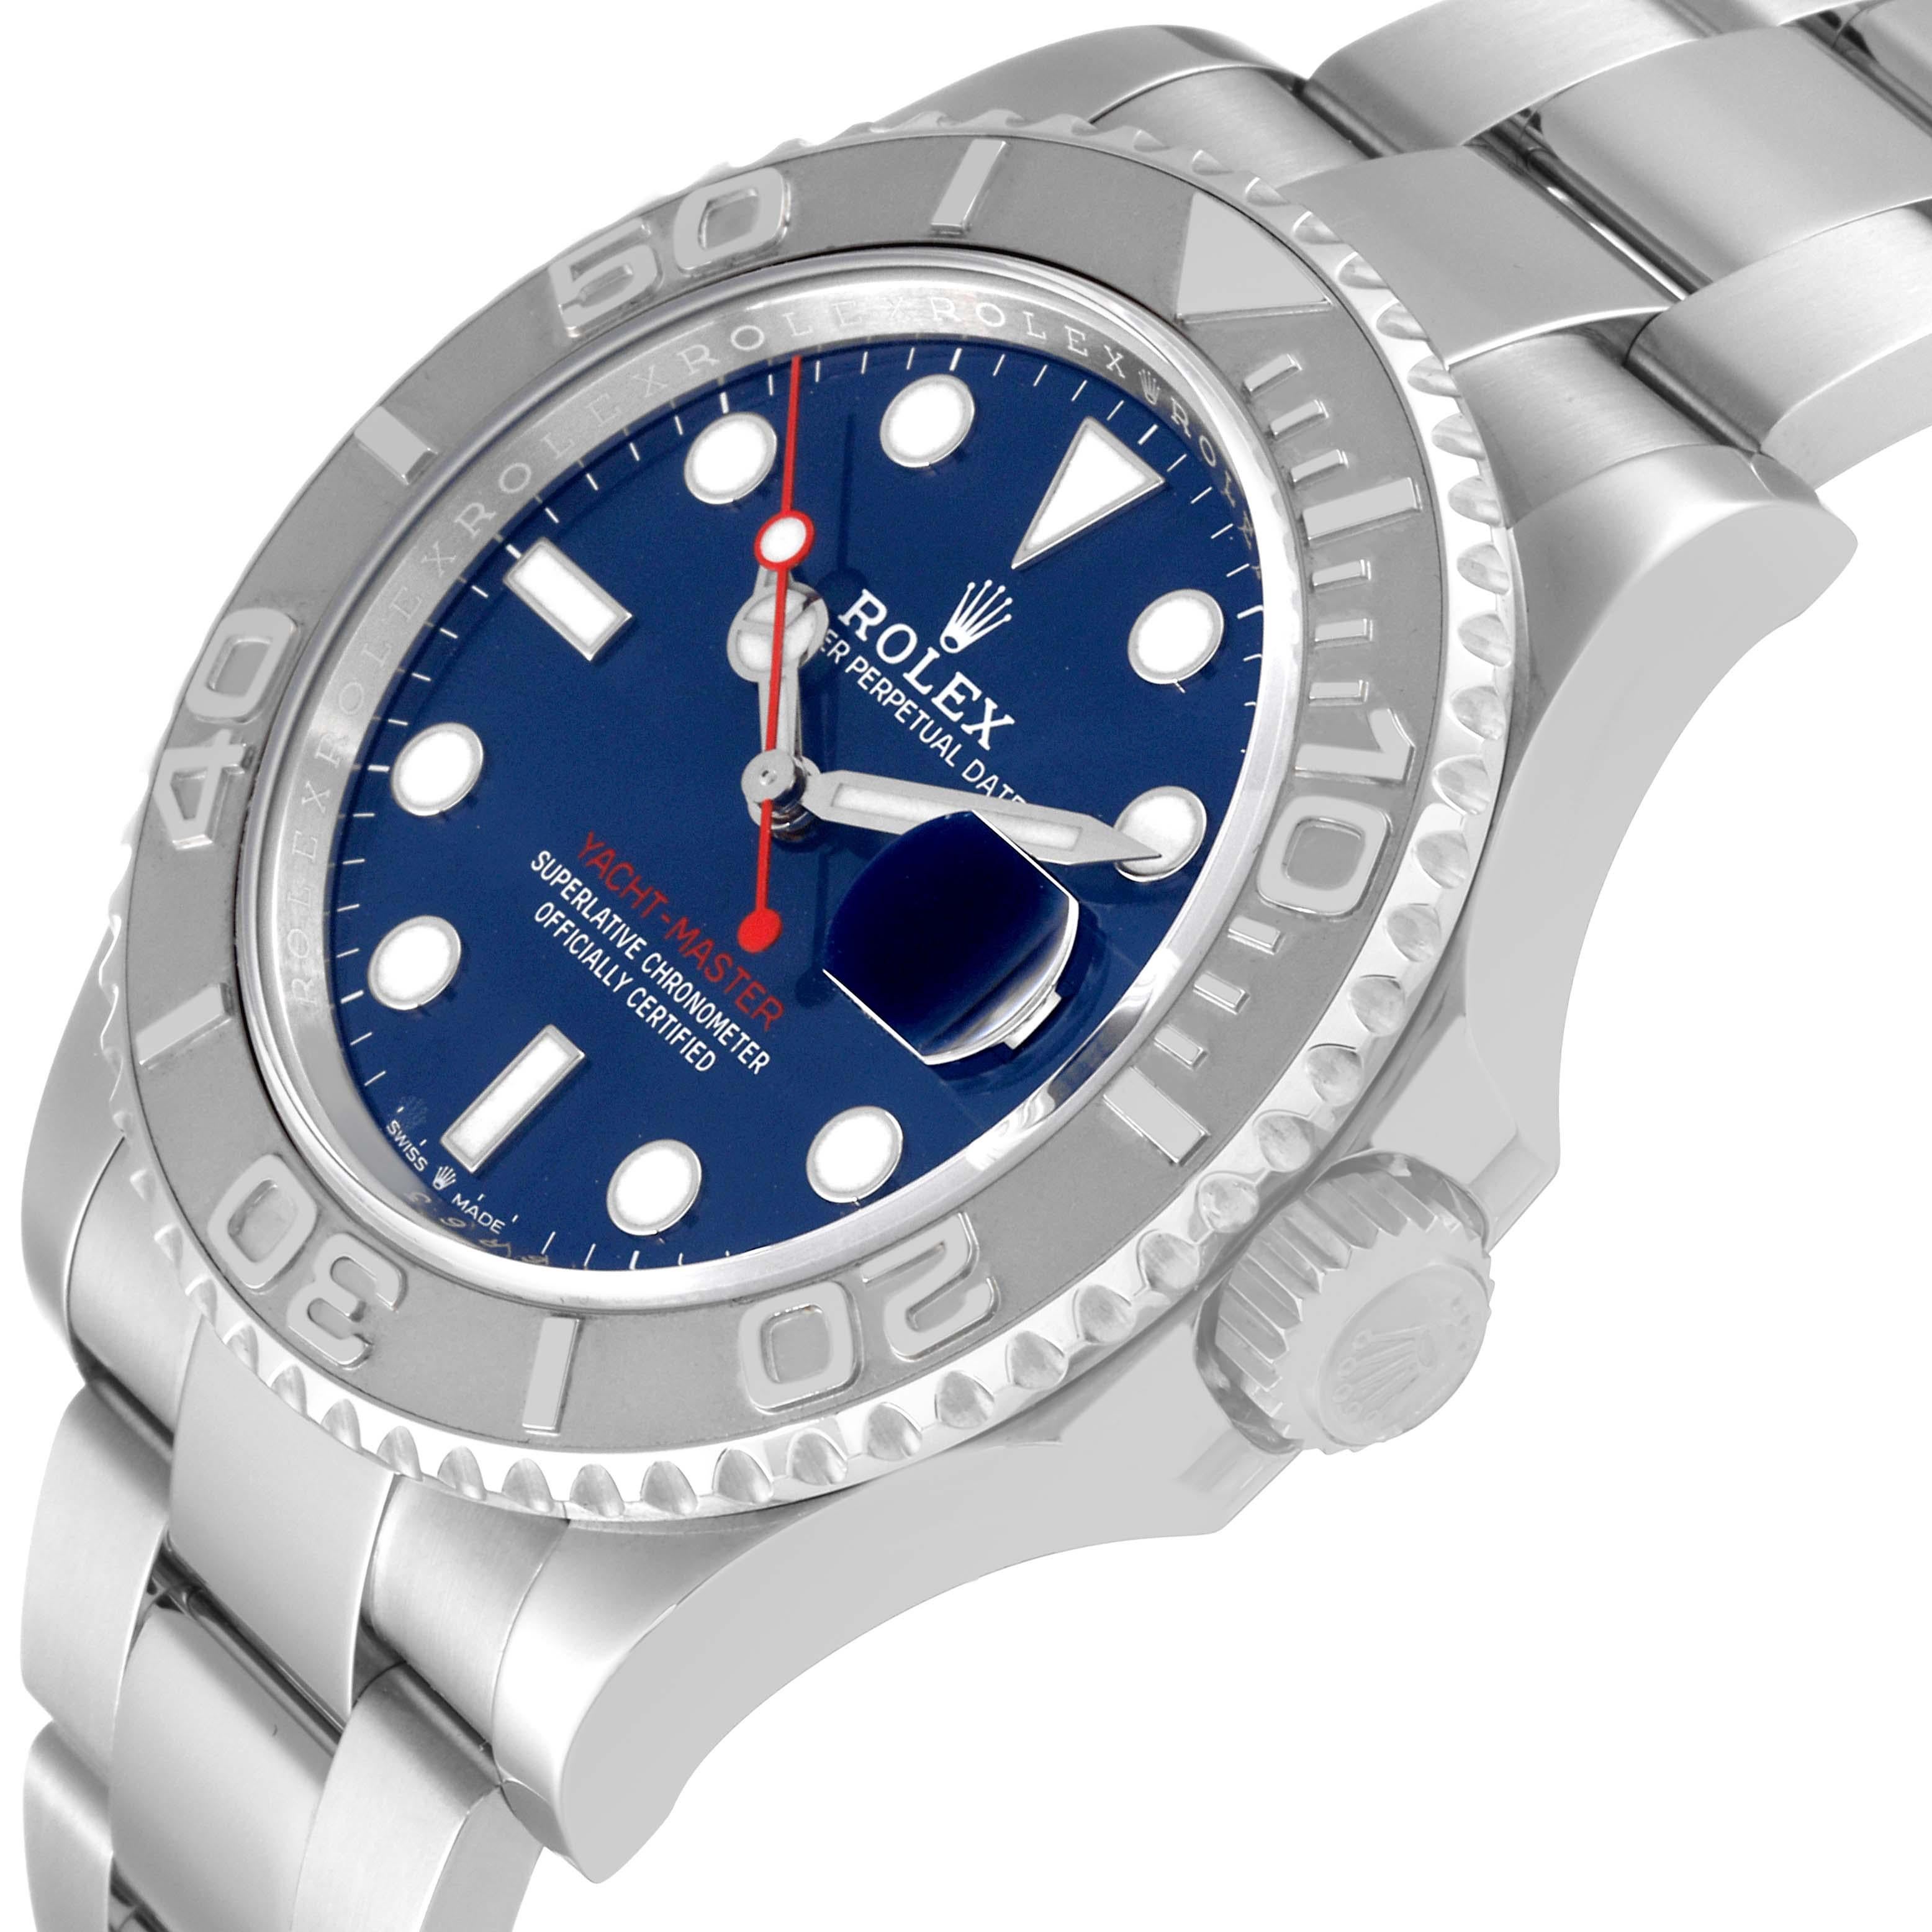 Rolex Yachtmaster Steel Platinum Blue Dial Mens Watch 126622 Box Card In Excellent Condition For Sale In Atlanta, GA